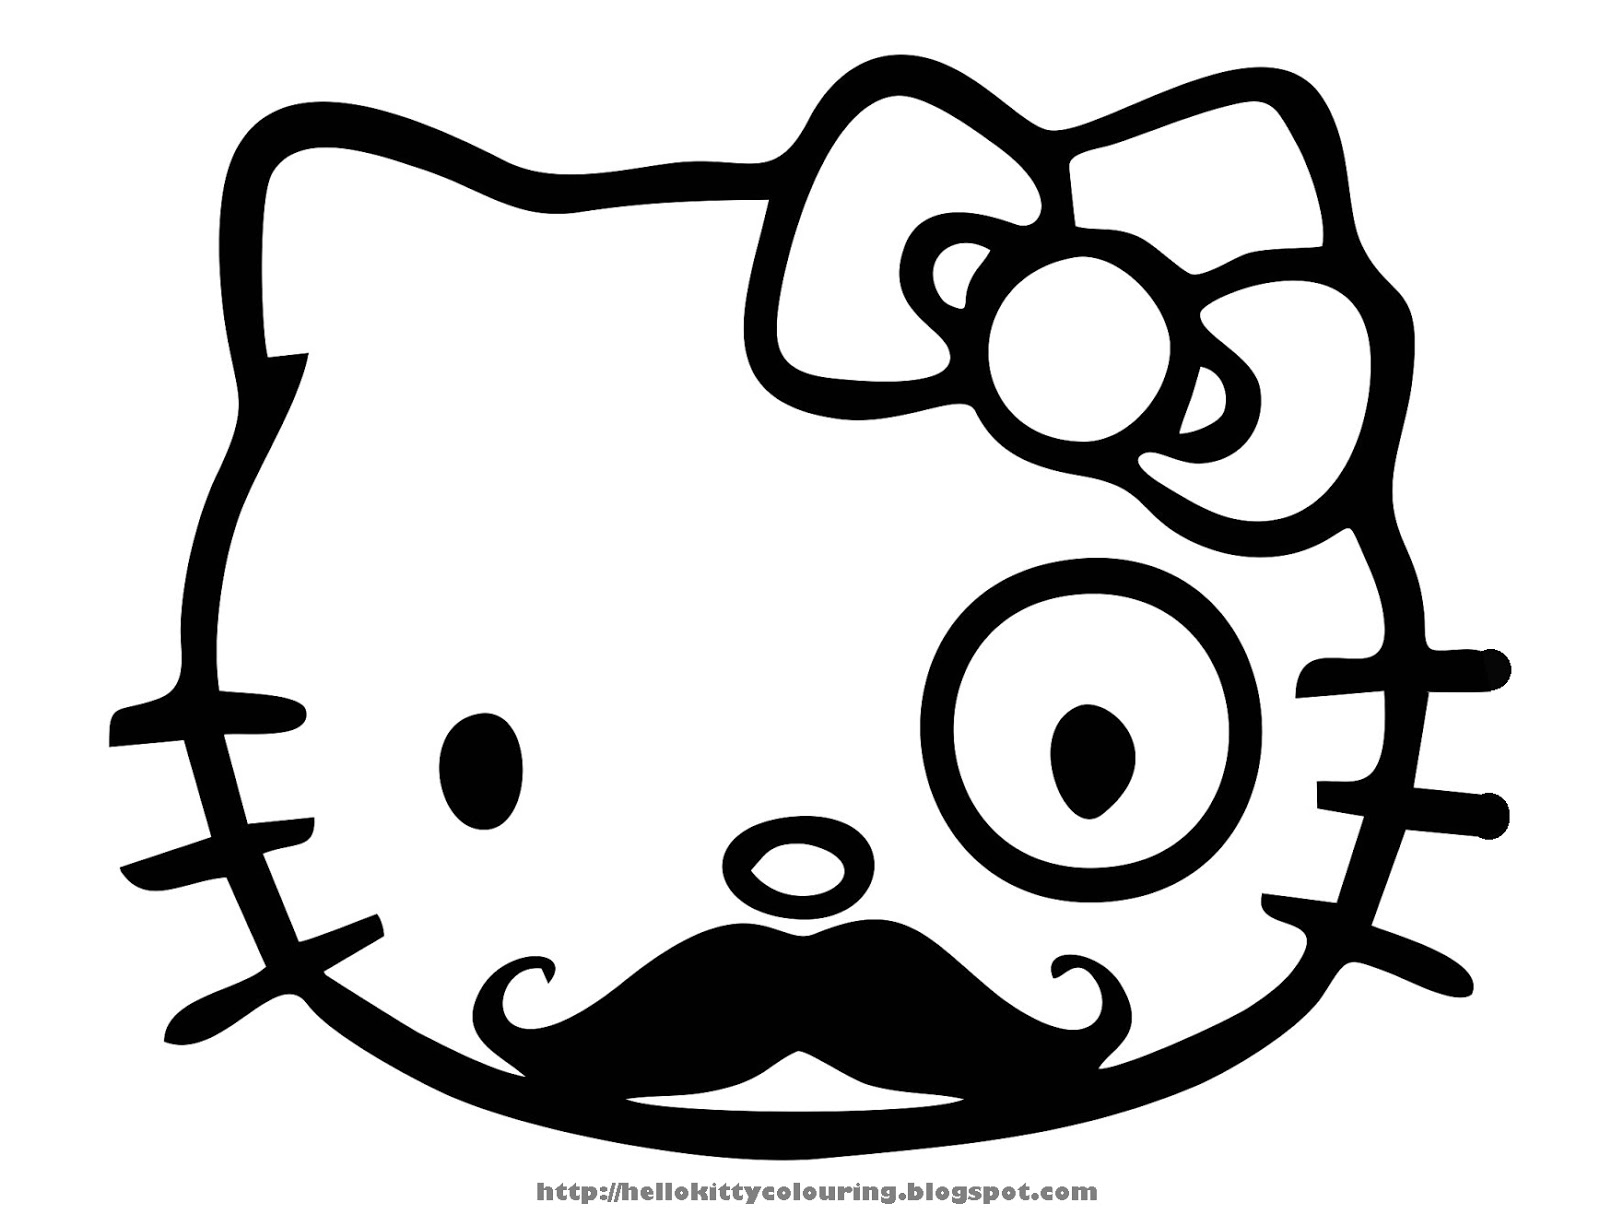 Hello Kitty Coloring Pages Wallpapers Coloring Wallpapers Download Free Images Wallpaper [coloring436.blogspot.com]